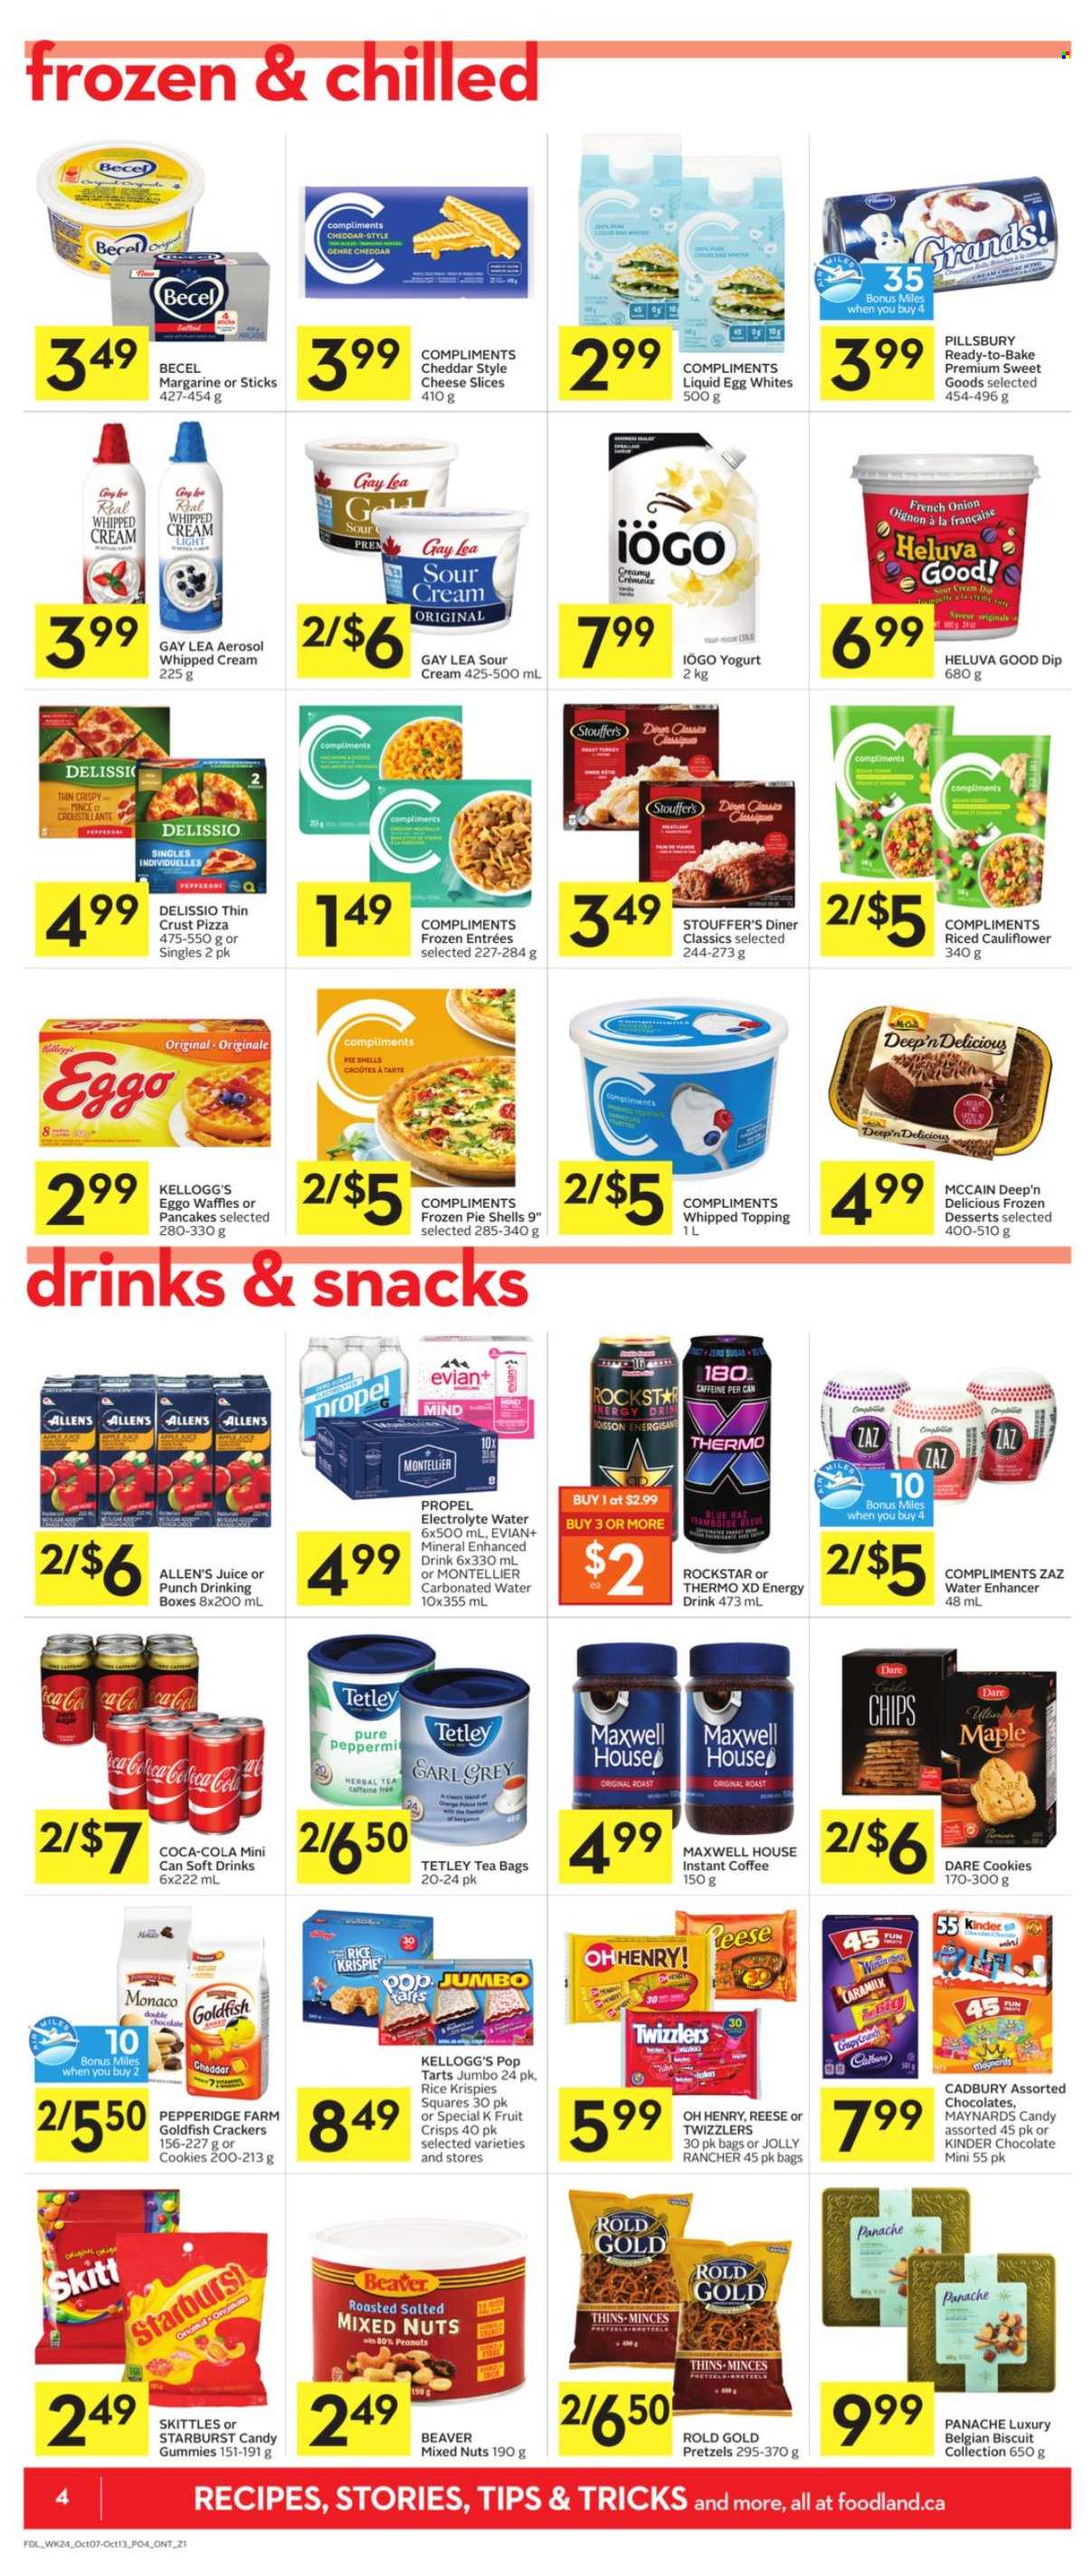 thumbnail - Foodland Flyer - October 07, 2021 - October 13, 2021 - Sales products - pretzels, pie, waffles, onion, pizza, Pillsbury, pepperoni, sliced cheese, yoghurt, eggs, margarine, sour cream, whipped cream, dip, Stouffer's, McCain, cookies, chocolate, crackers, Kellogg's, biscuit, Cadbury, Skittles, Pop-Tarts, Starburst, Thins, Goldfish, sugar, topping, Rice Krispies, peanuts, mixed nuts, Coca-Cola, juice, energy drink, soft drink, Rockstar, Evian, Maxwell House, herbal tea, tea bags, instant coffee. Page 4.